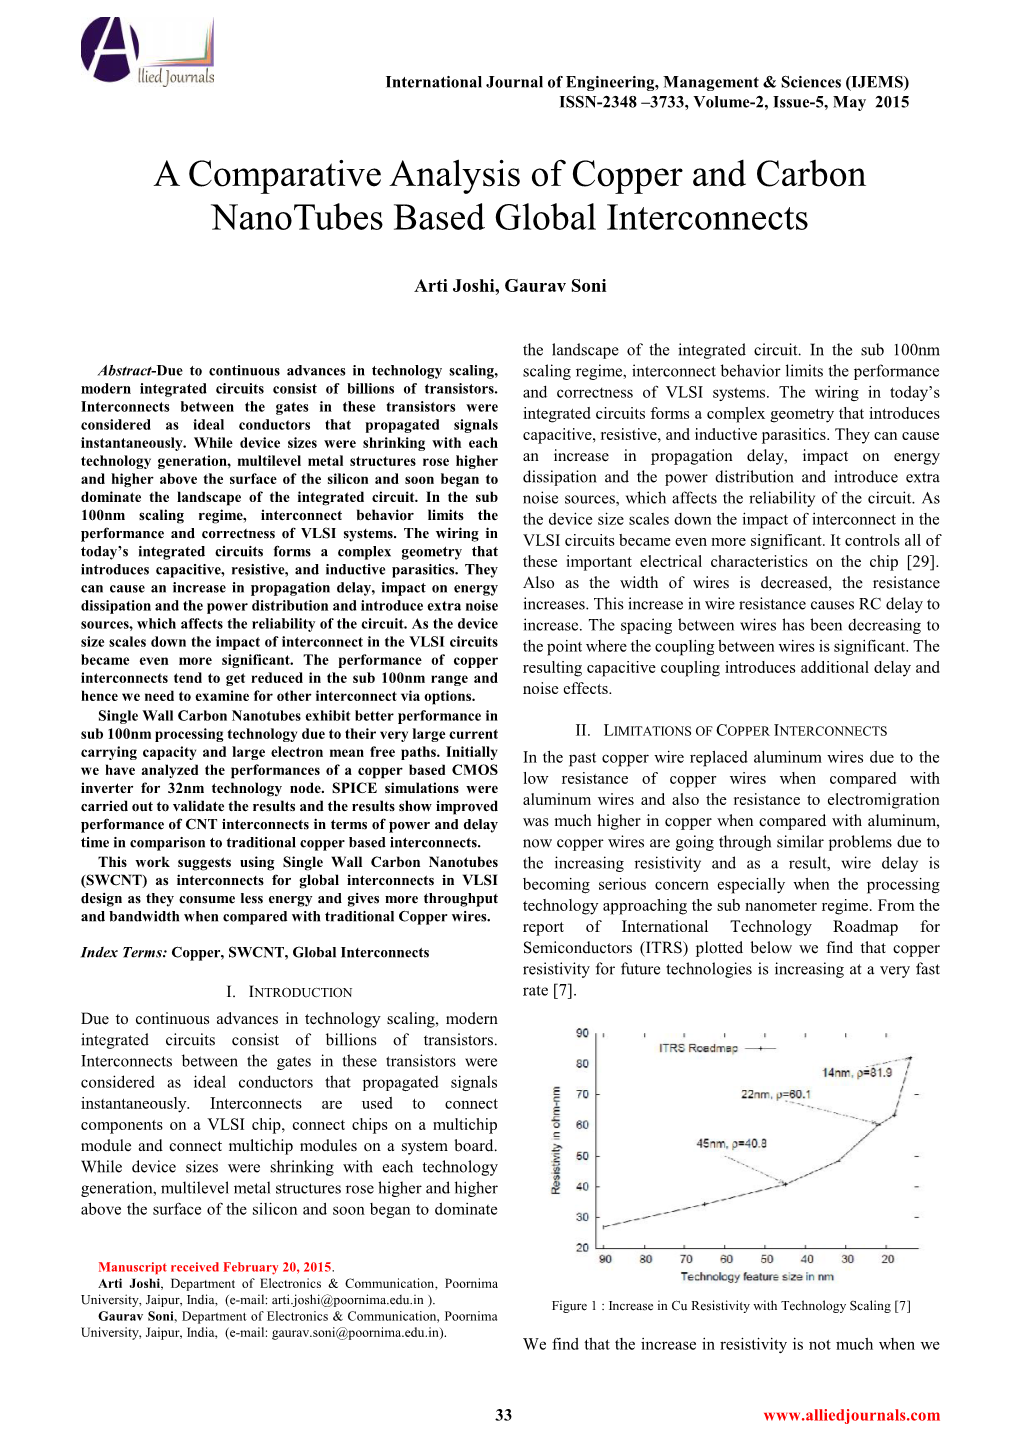 A Comparative Analysis of Copper and Carbon Nanotubes Based Global Interconnects